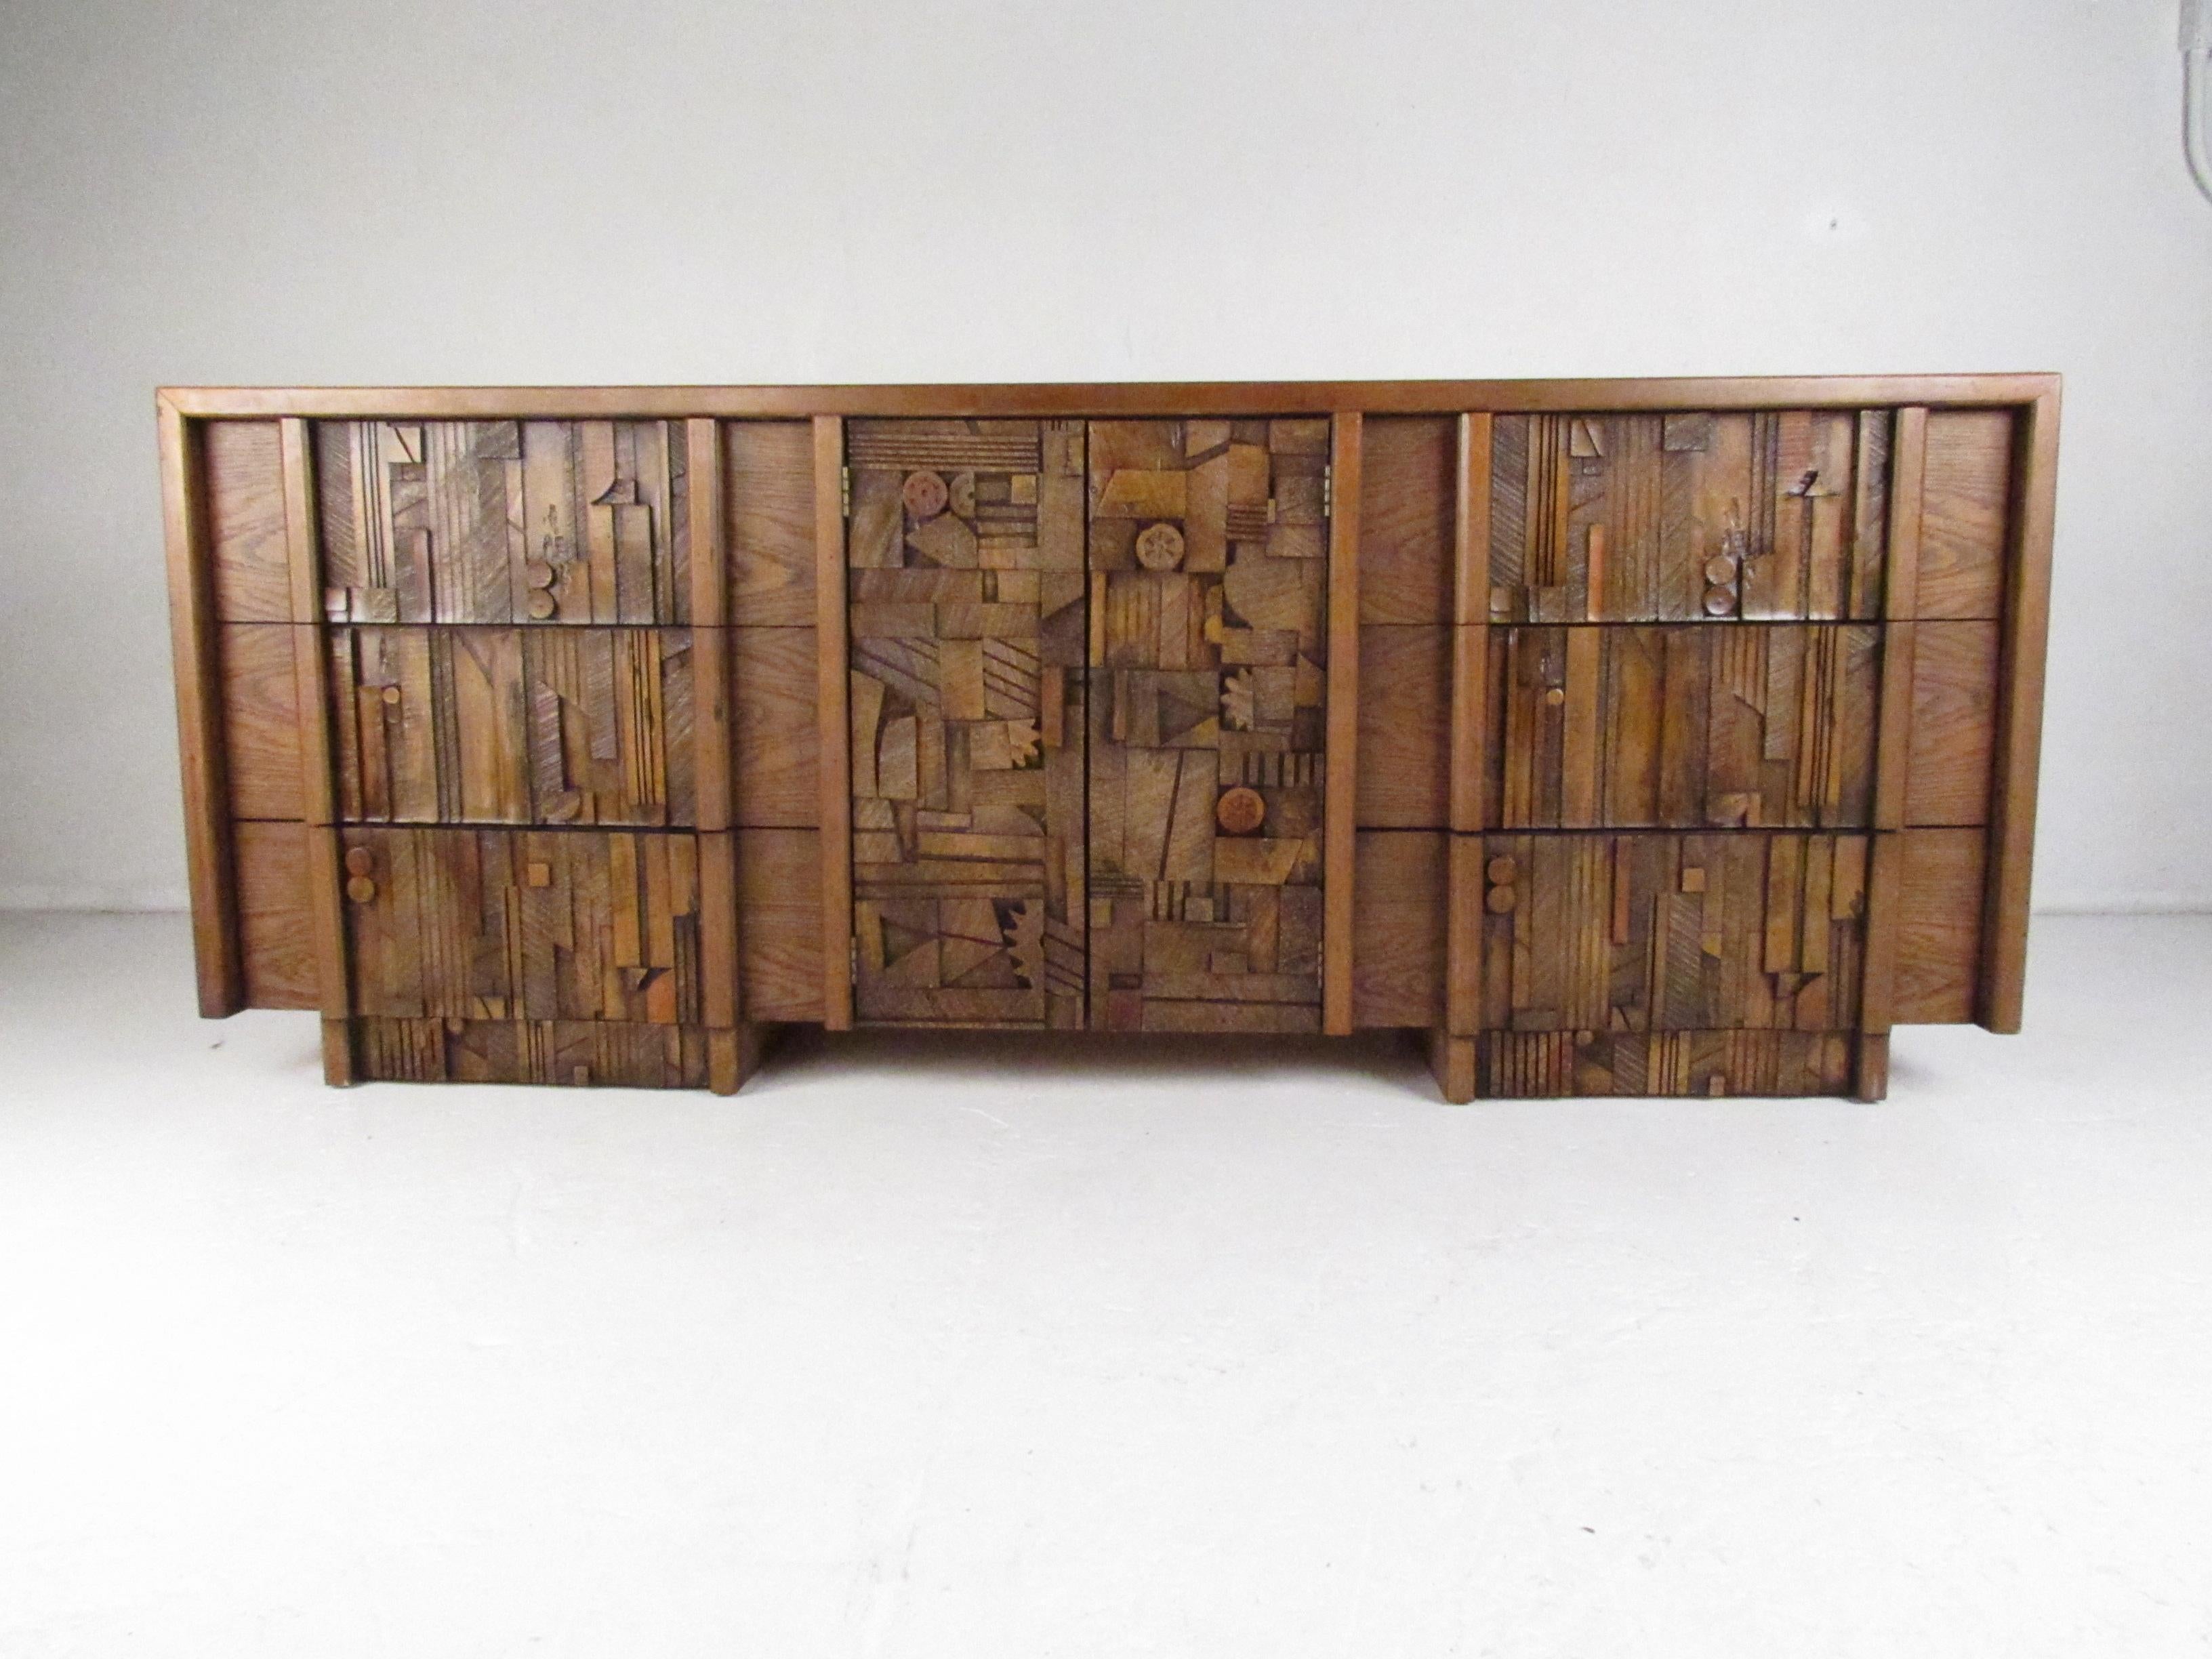 This elaborate vintage modern credenza features nine hefty drawers with colorful brutalist fronts. This sleek case piece offers plenty of room for storage without sacrificing style. A well made dresser with stunning oak wood grain throughout. Please